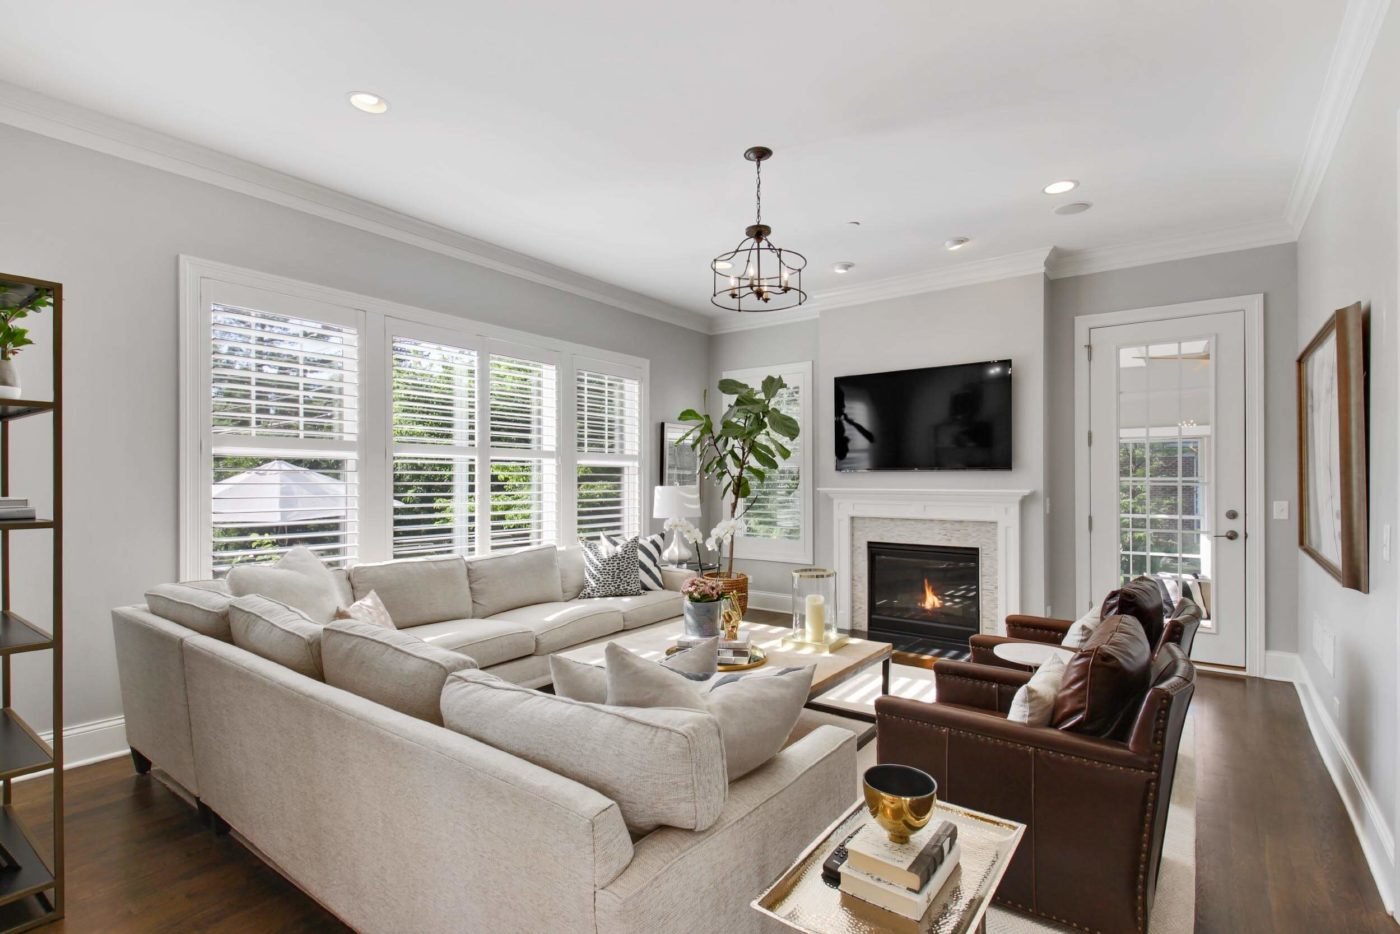 Image of the beautiful family room with a fireplace